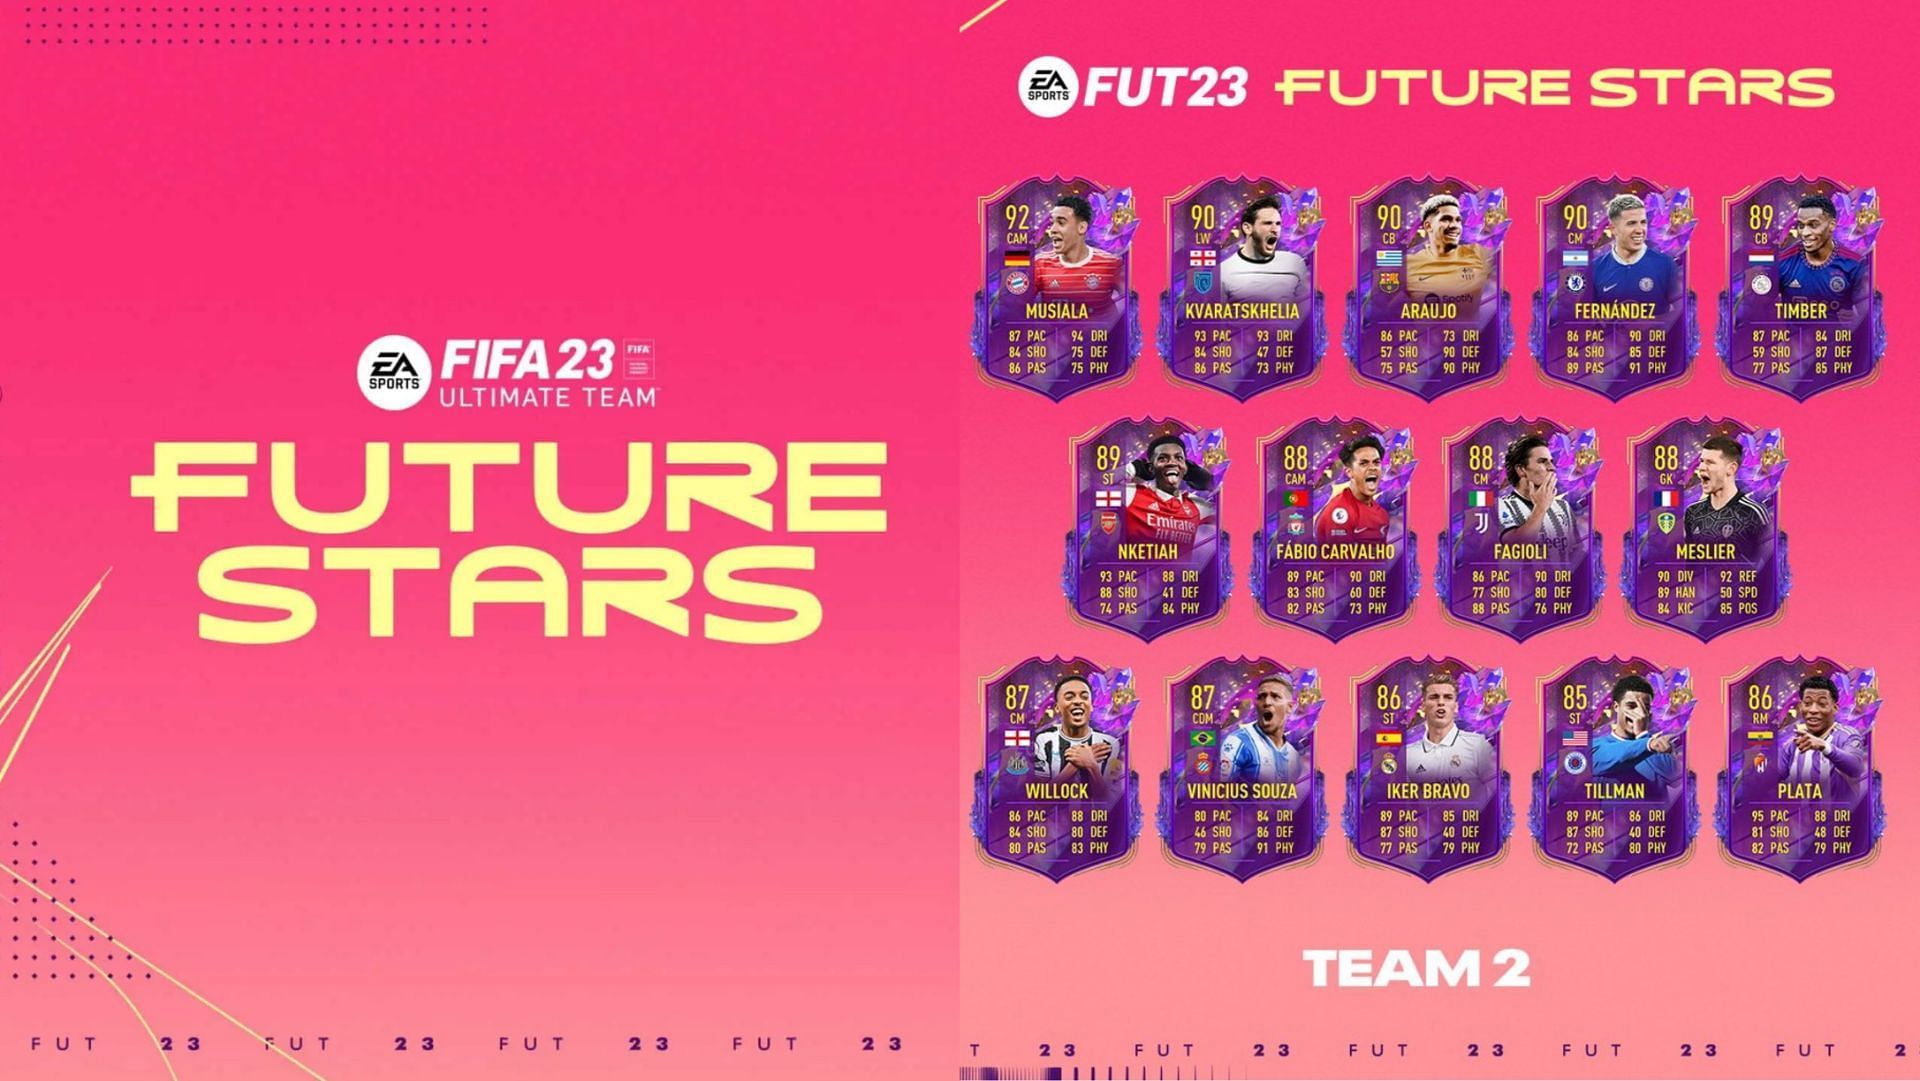 Kvaratskhelia and Musiala&rsquo;s Future Stars items will be high on the wishlist of every FIFA 23 Ultimate Team player (Images via EA Sports)